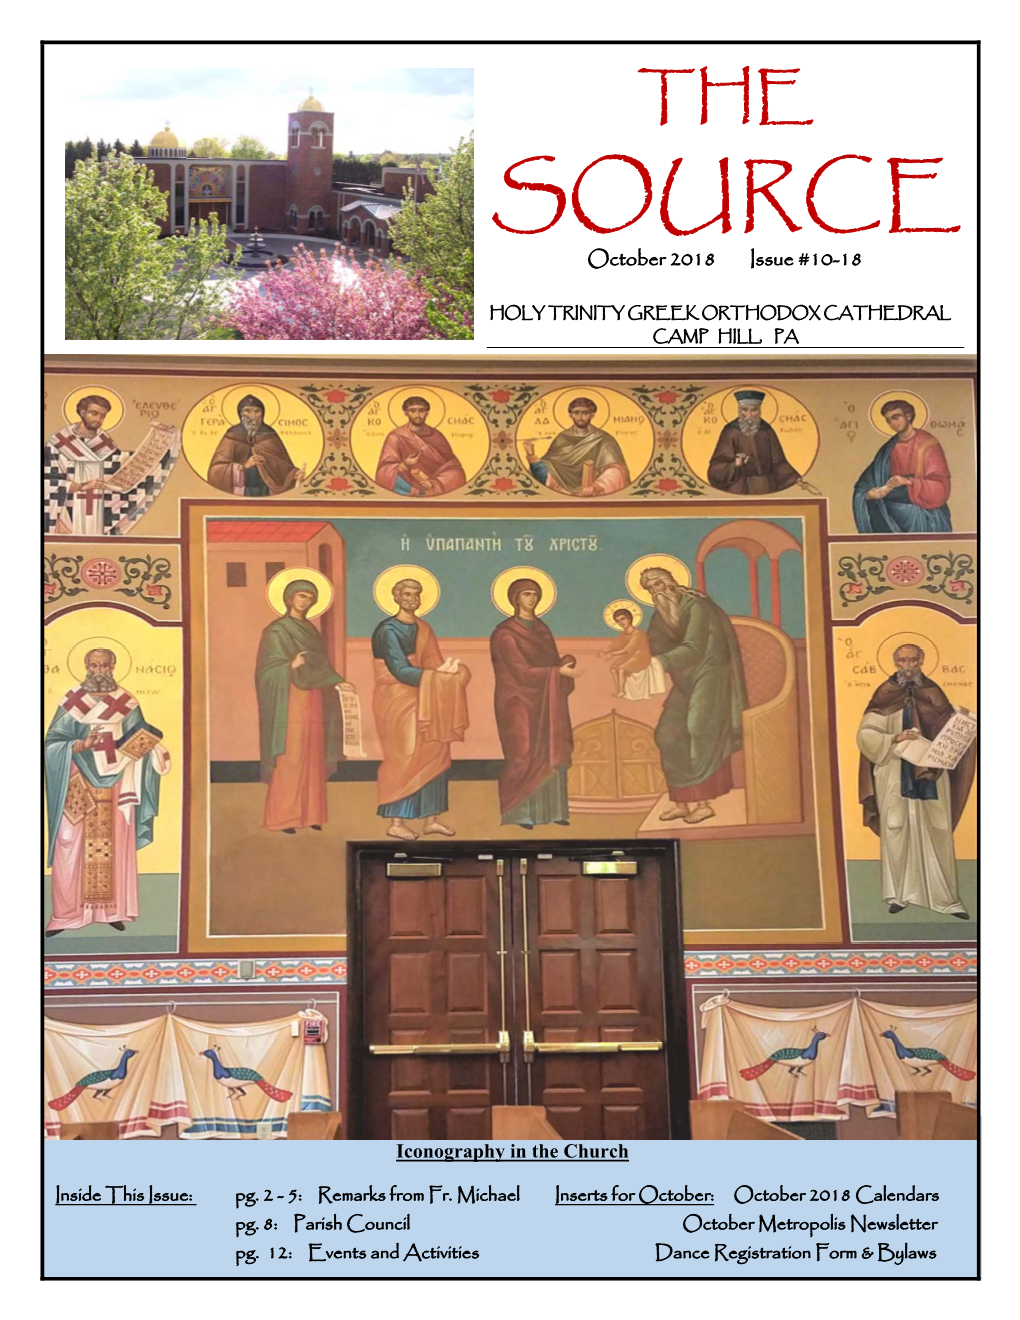 SOURCE October 2018 Issue #10-18